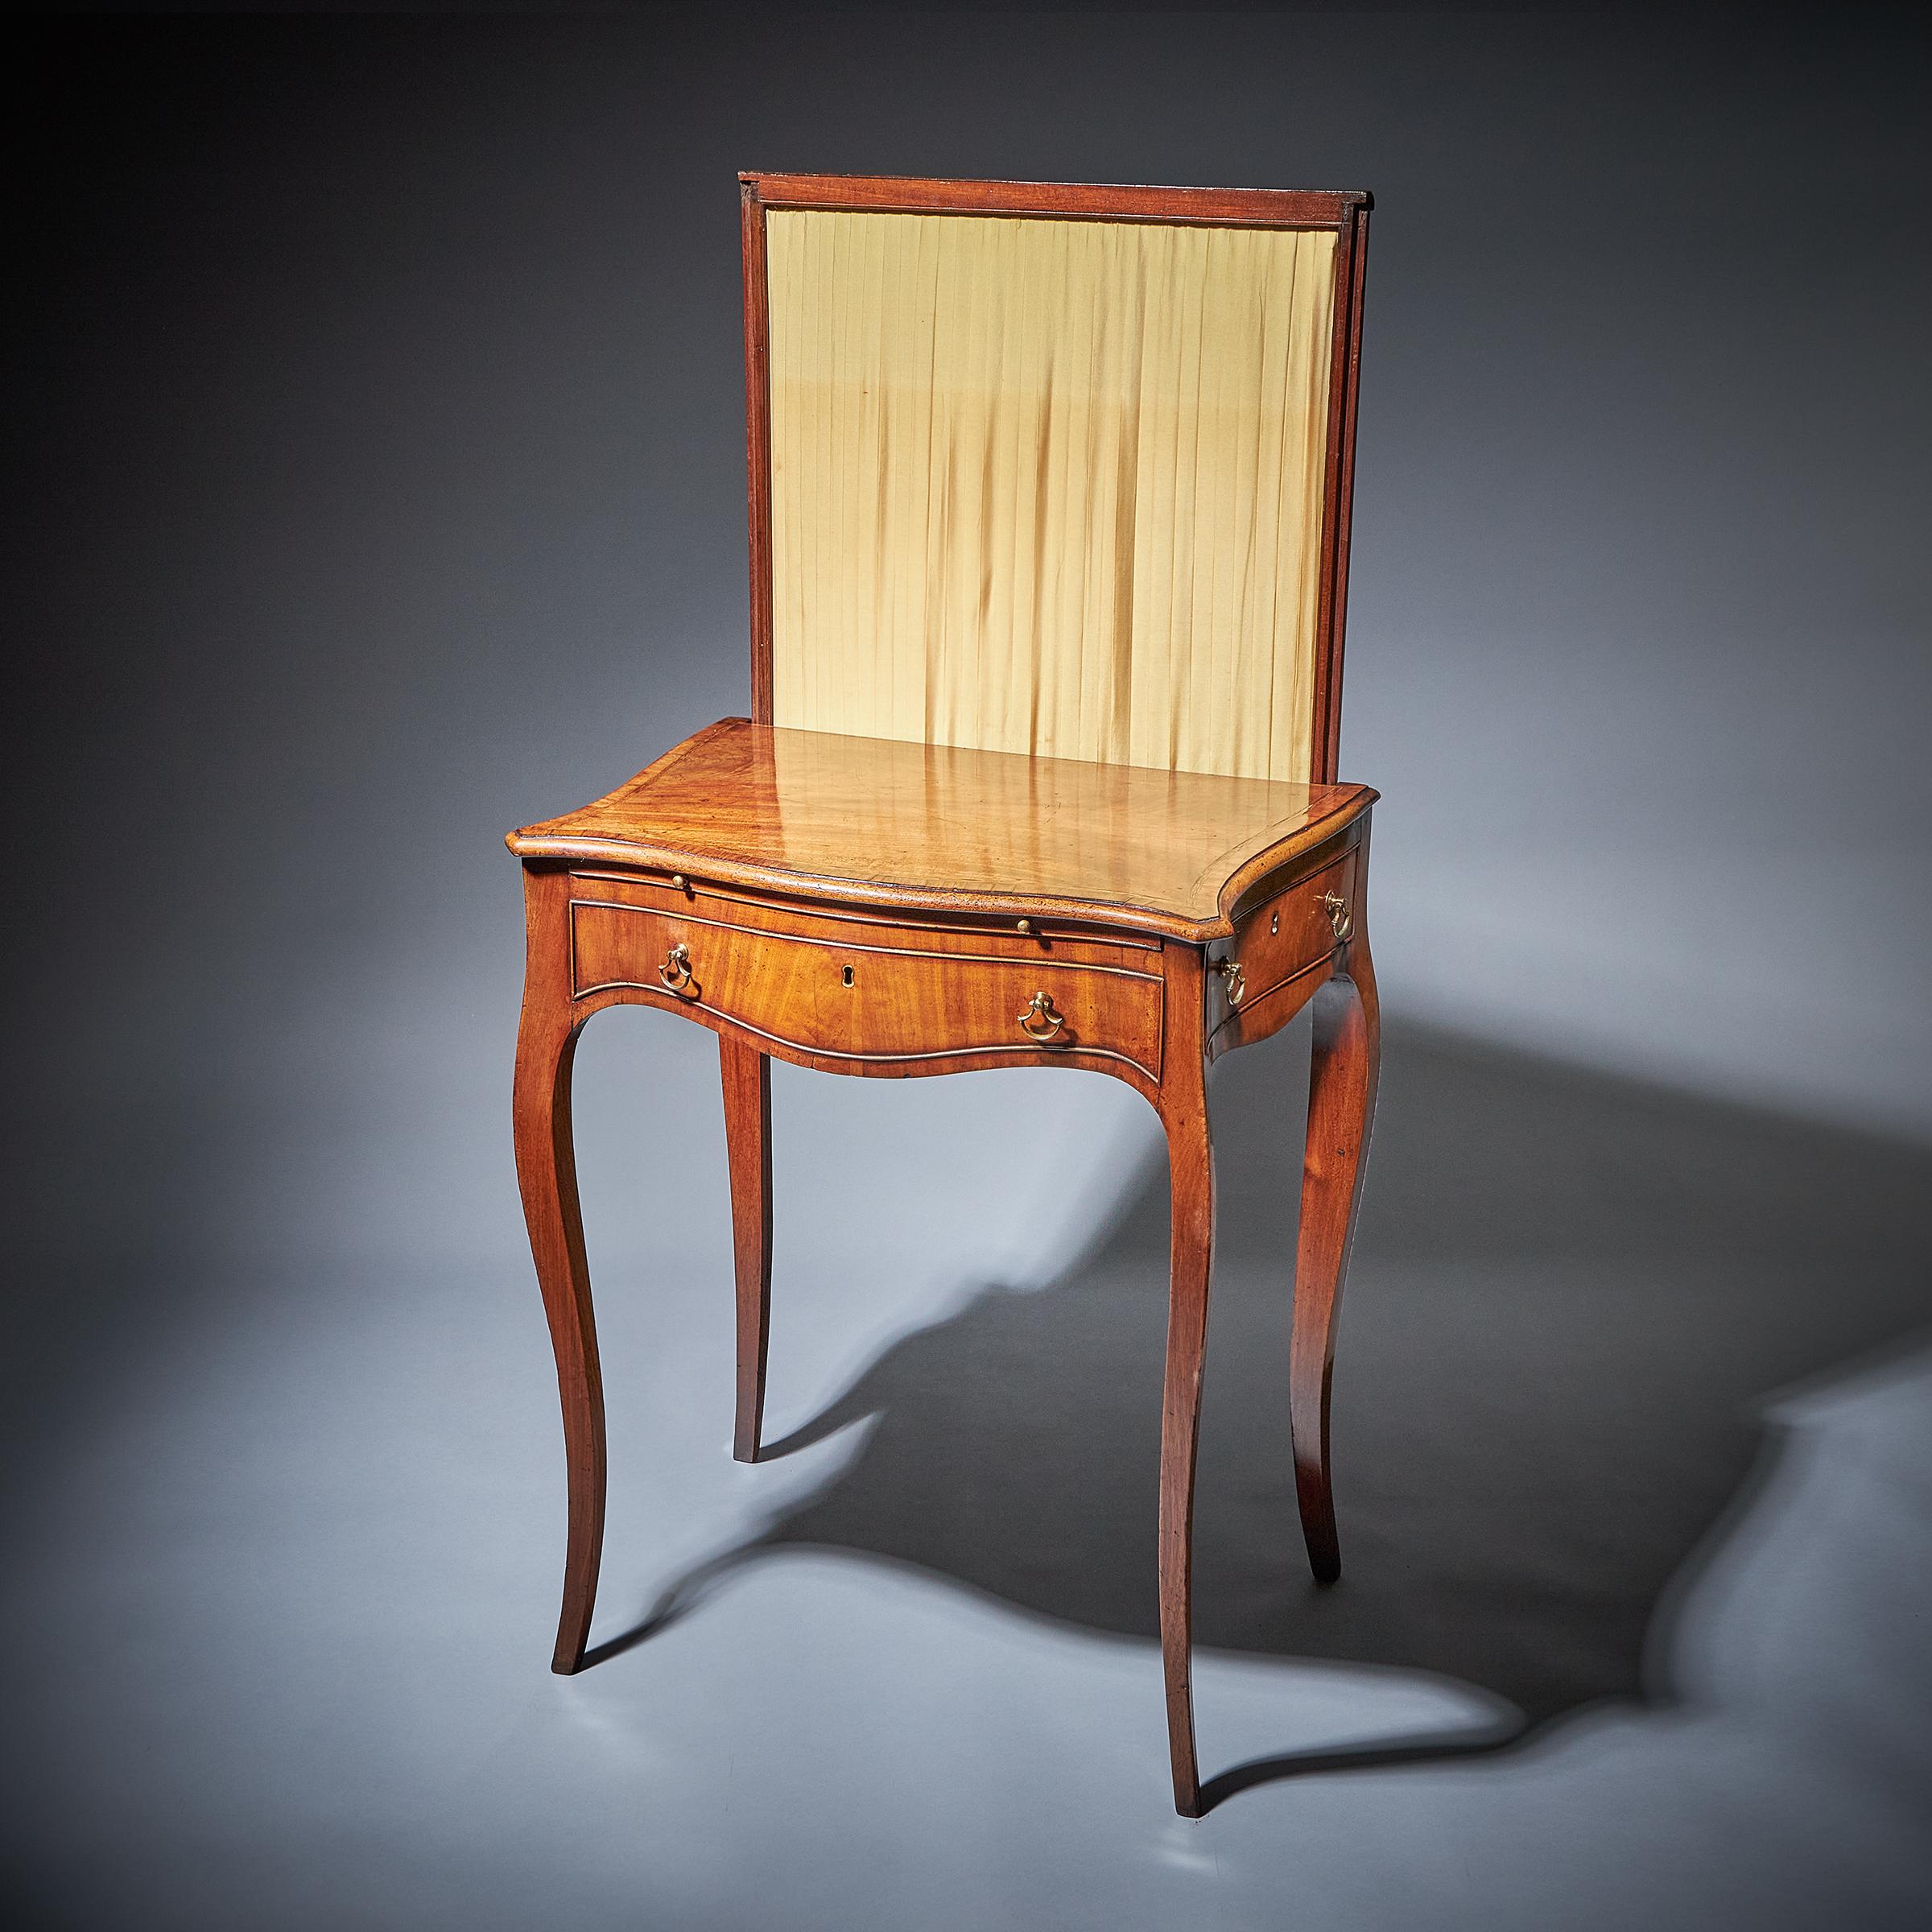 A fine and rare mahogany serpentine writing table in the manner of Thomas Chippendale with retractable firescreeen, writing slide inset with tooled leather and drawer to one side bearing the label for M.Harris and Sons. 

The serpentine ovolo